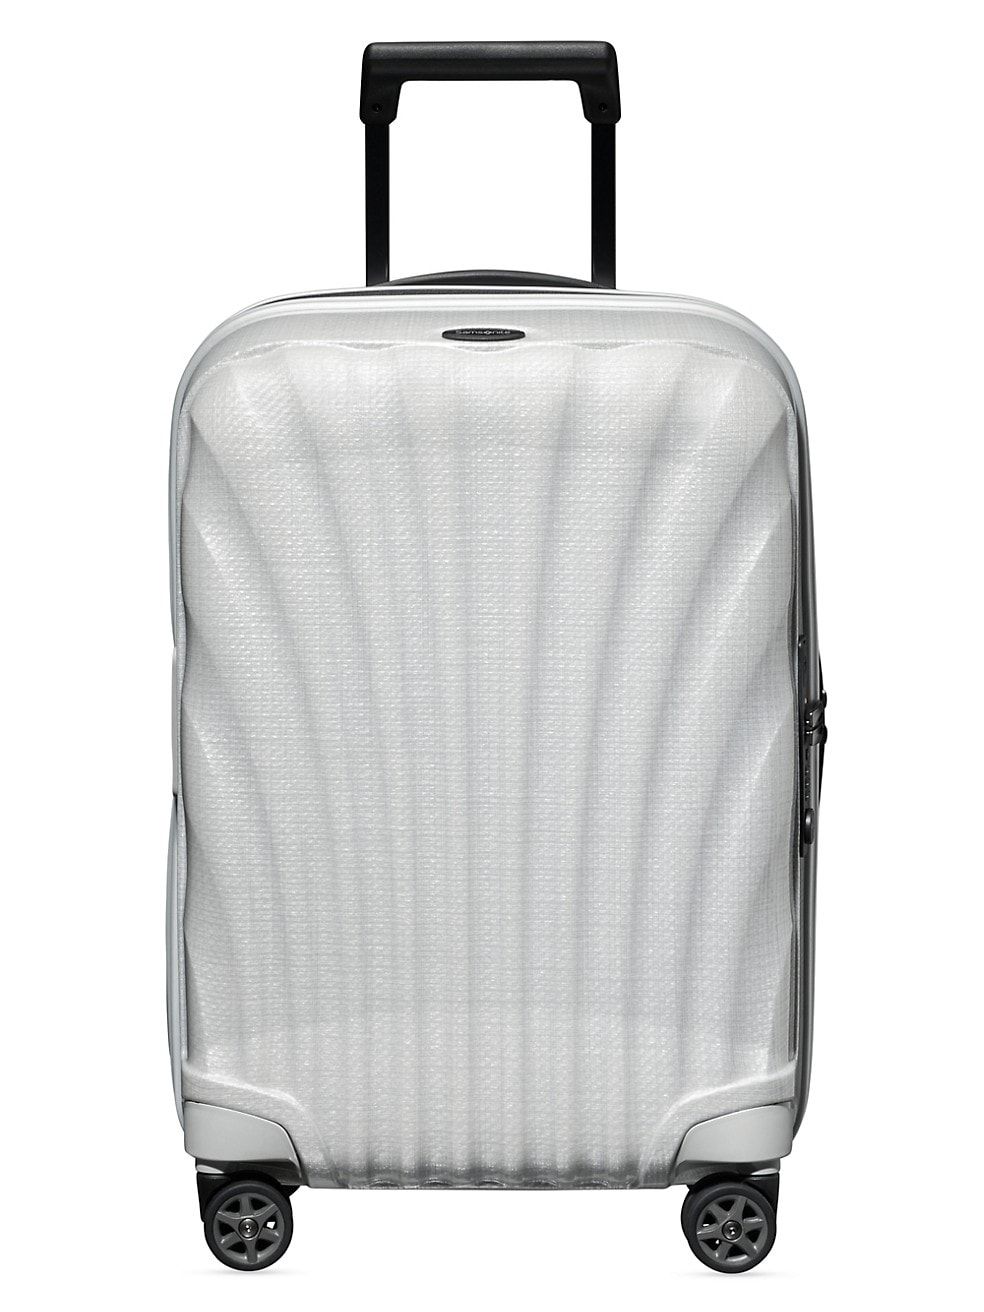 Four-Wheel Spinner 5520 Suitcase | Saks Fifth Avenue